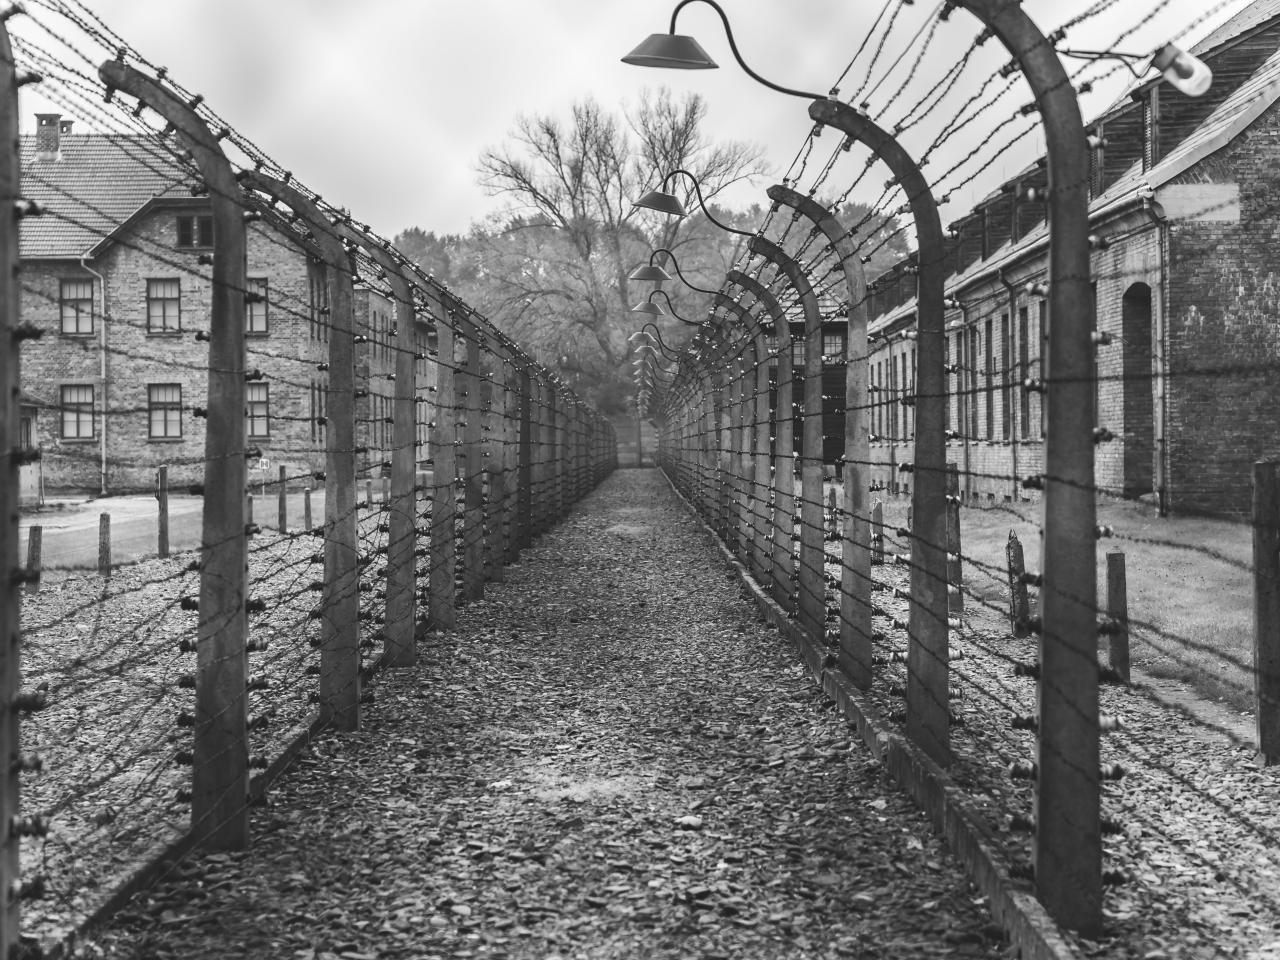 Black and white photo looking down a long, narrow corridor created by Nazi concentration camp barbed wire fencing. Beyond the fencing, on one side, a gas chamber.